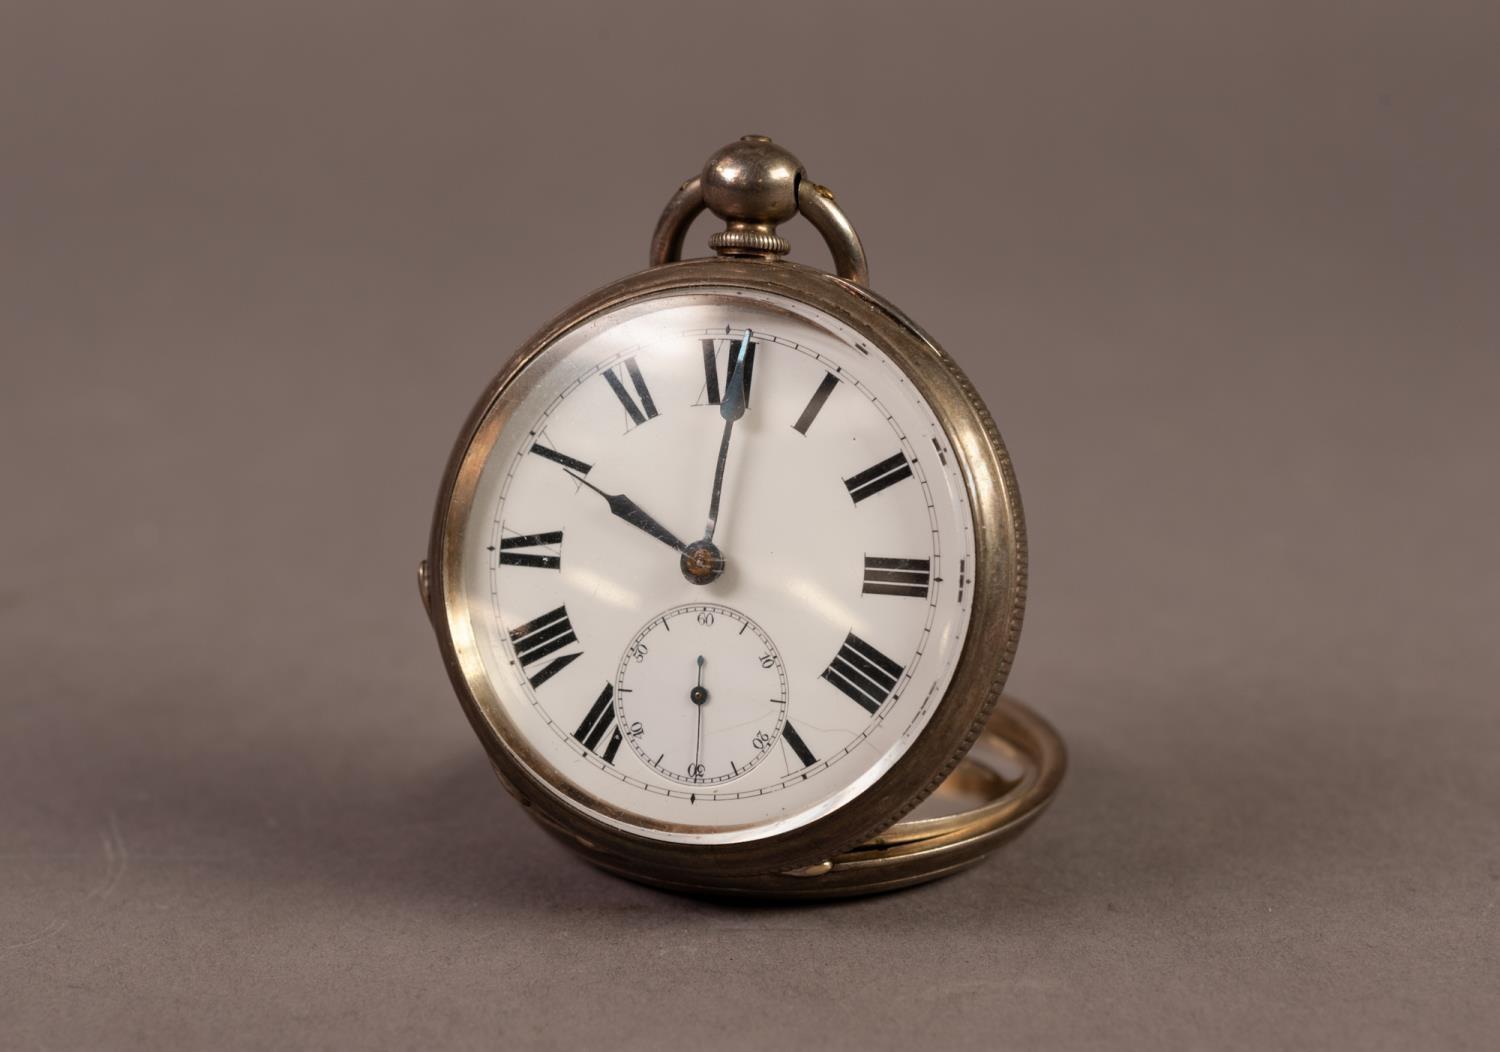 LARGE OPEN FACED POCKET WATCH with key wind movement, white Roman dial, having subsidiary seconds